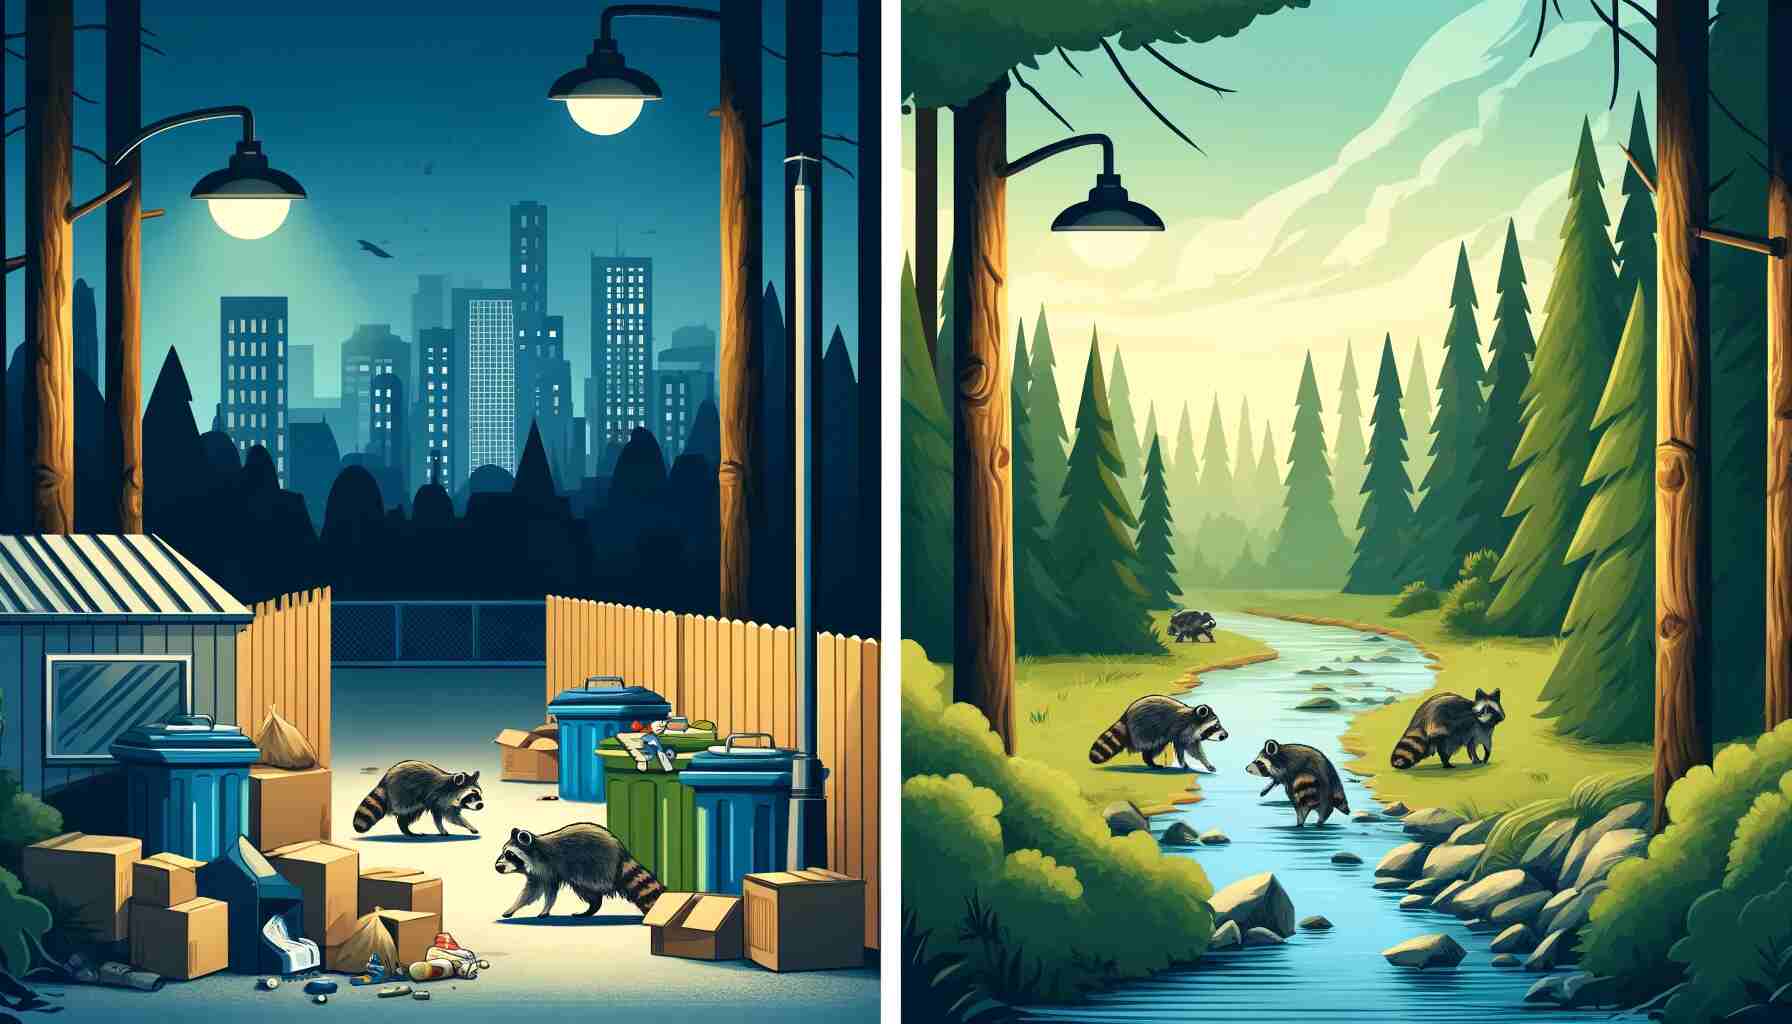 Illustration showing the contrast between urban and rural raccoon habitats. On the left, raccoons are scavenging in garbage bins near buildings and streetlights, while on the right, raccoons are in a forested area near a stream, surrounded by trees and natural shelters. The background transitions smoothly between the two environments.